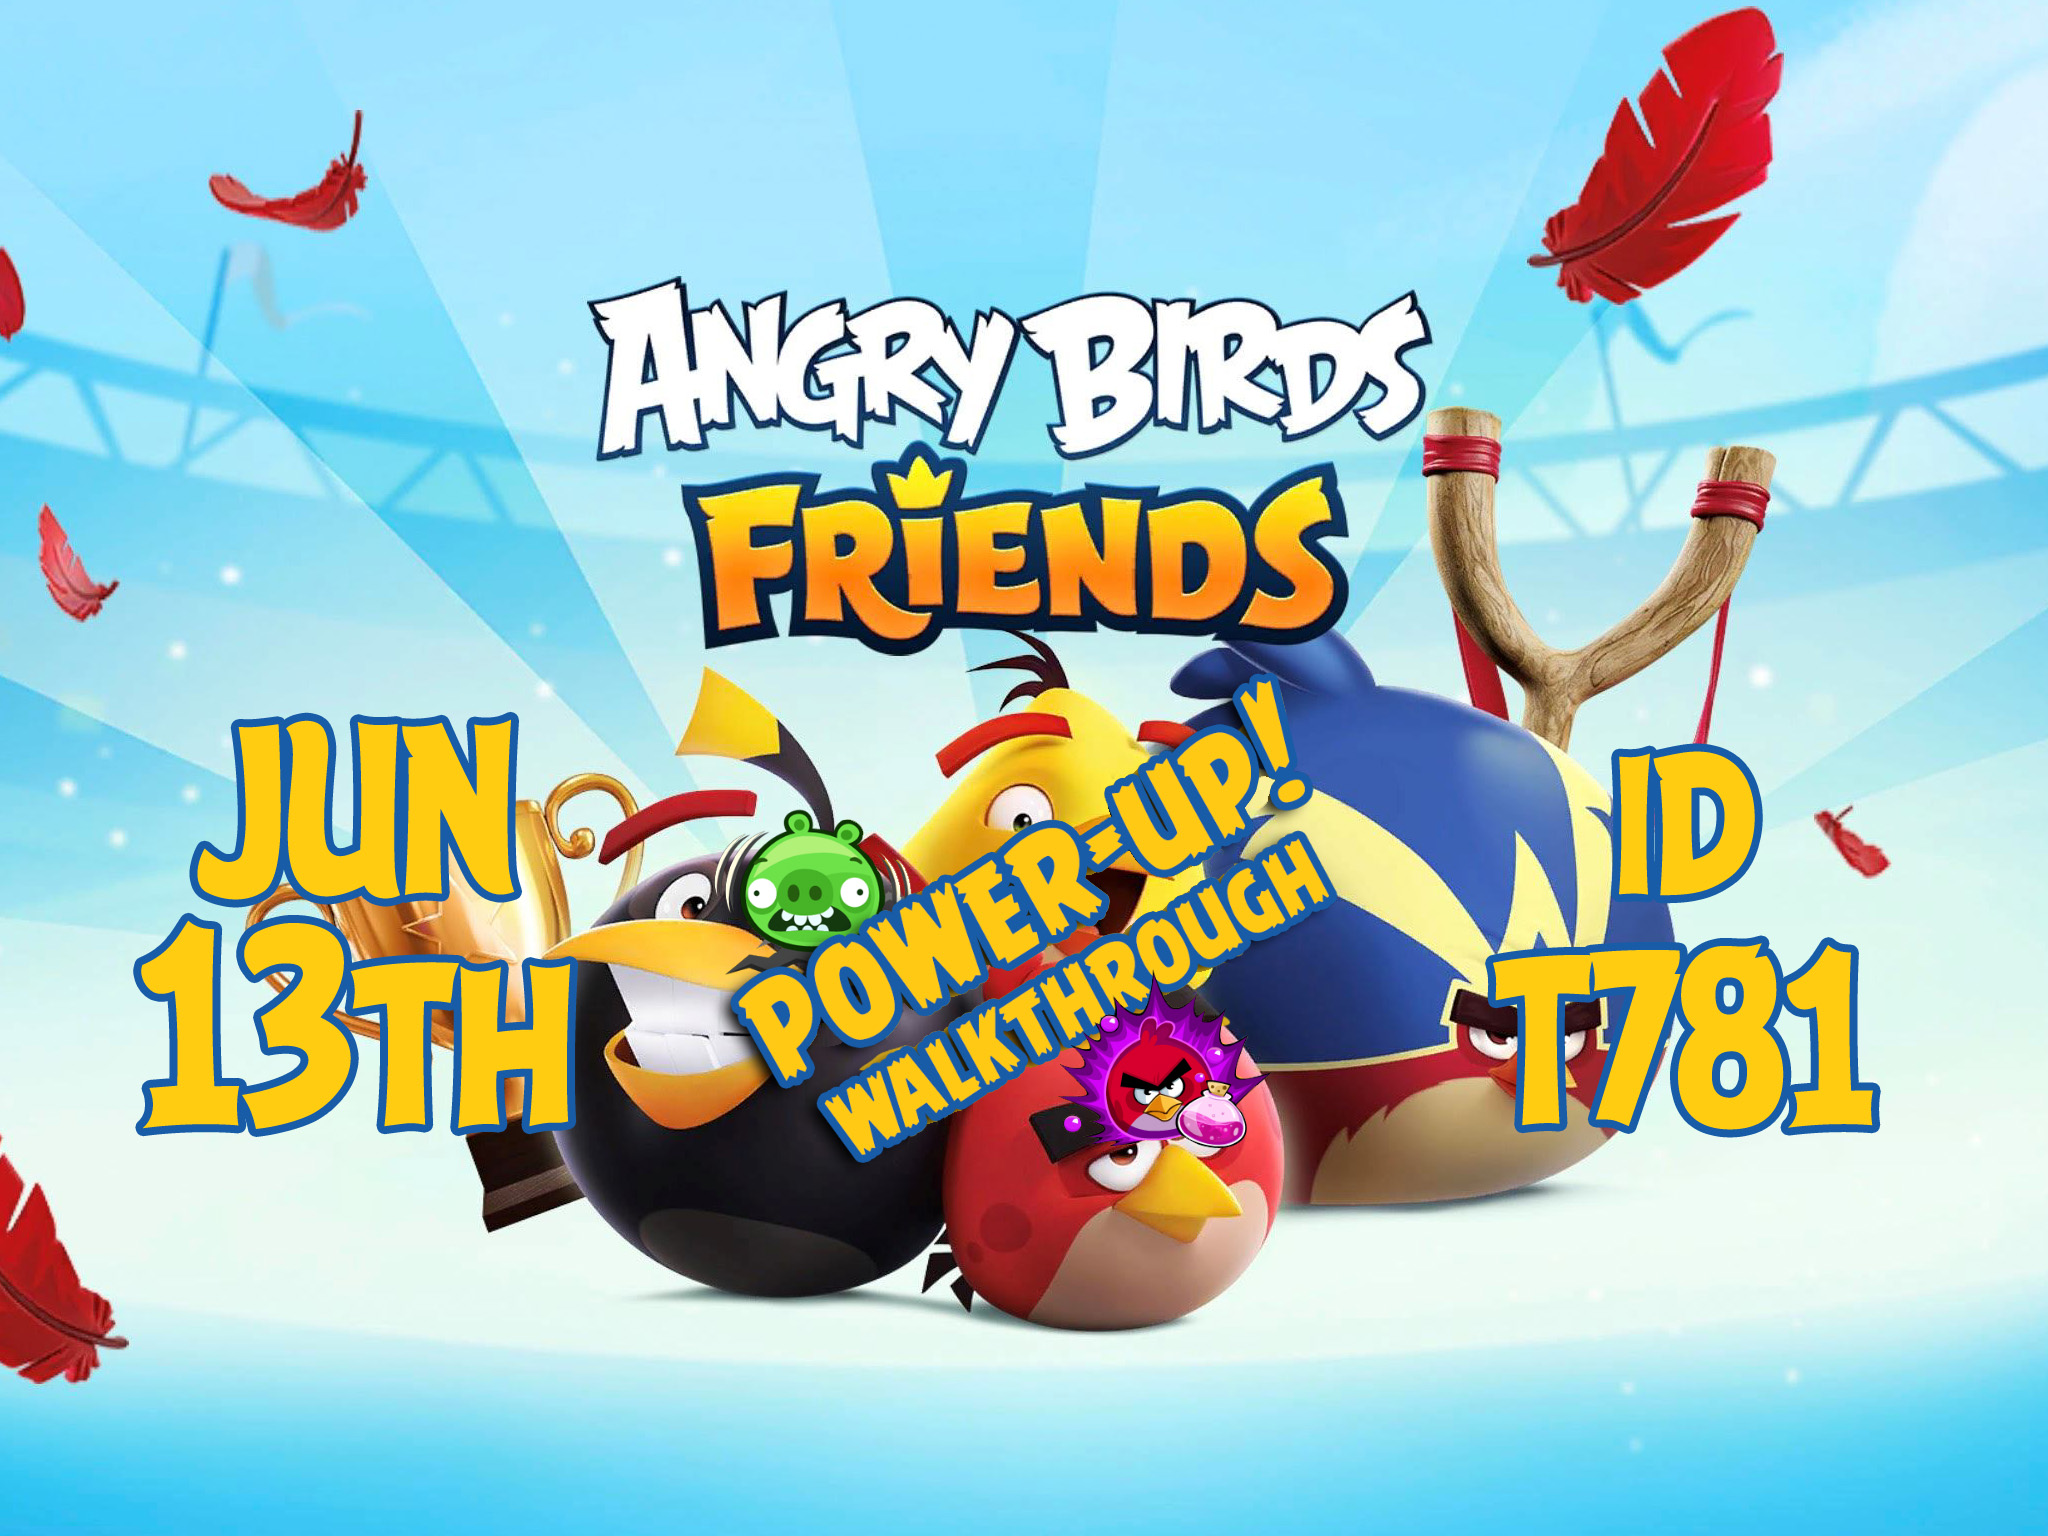 Angry-Birds-Friends-Tournament-T781-Feature-Image-PU